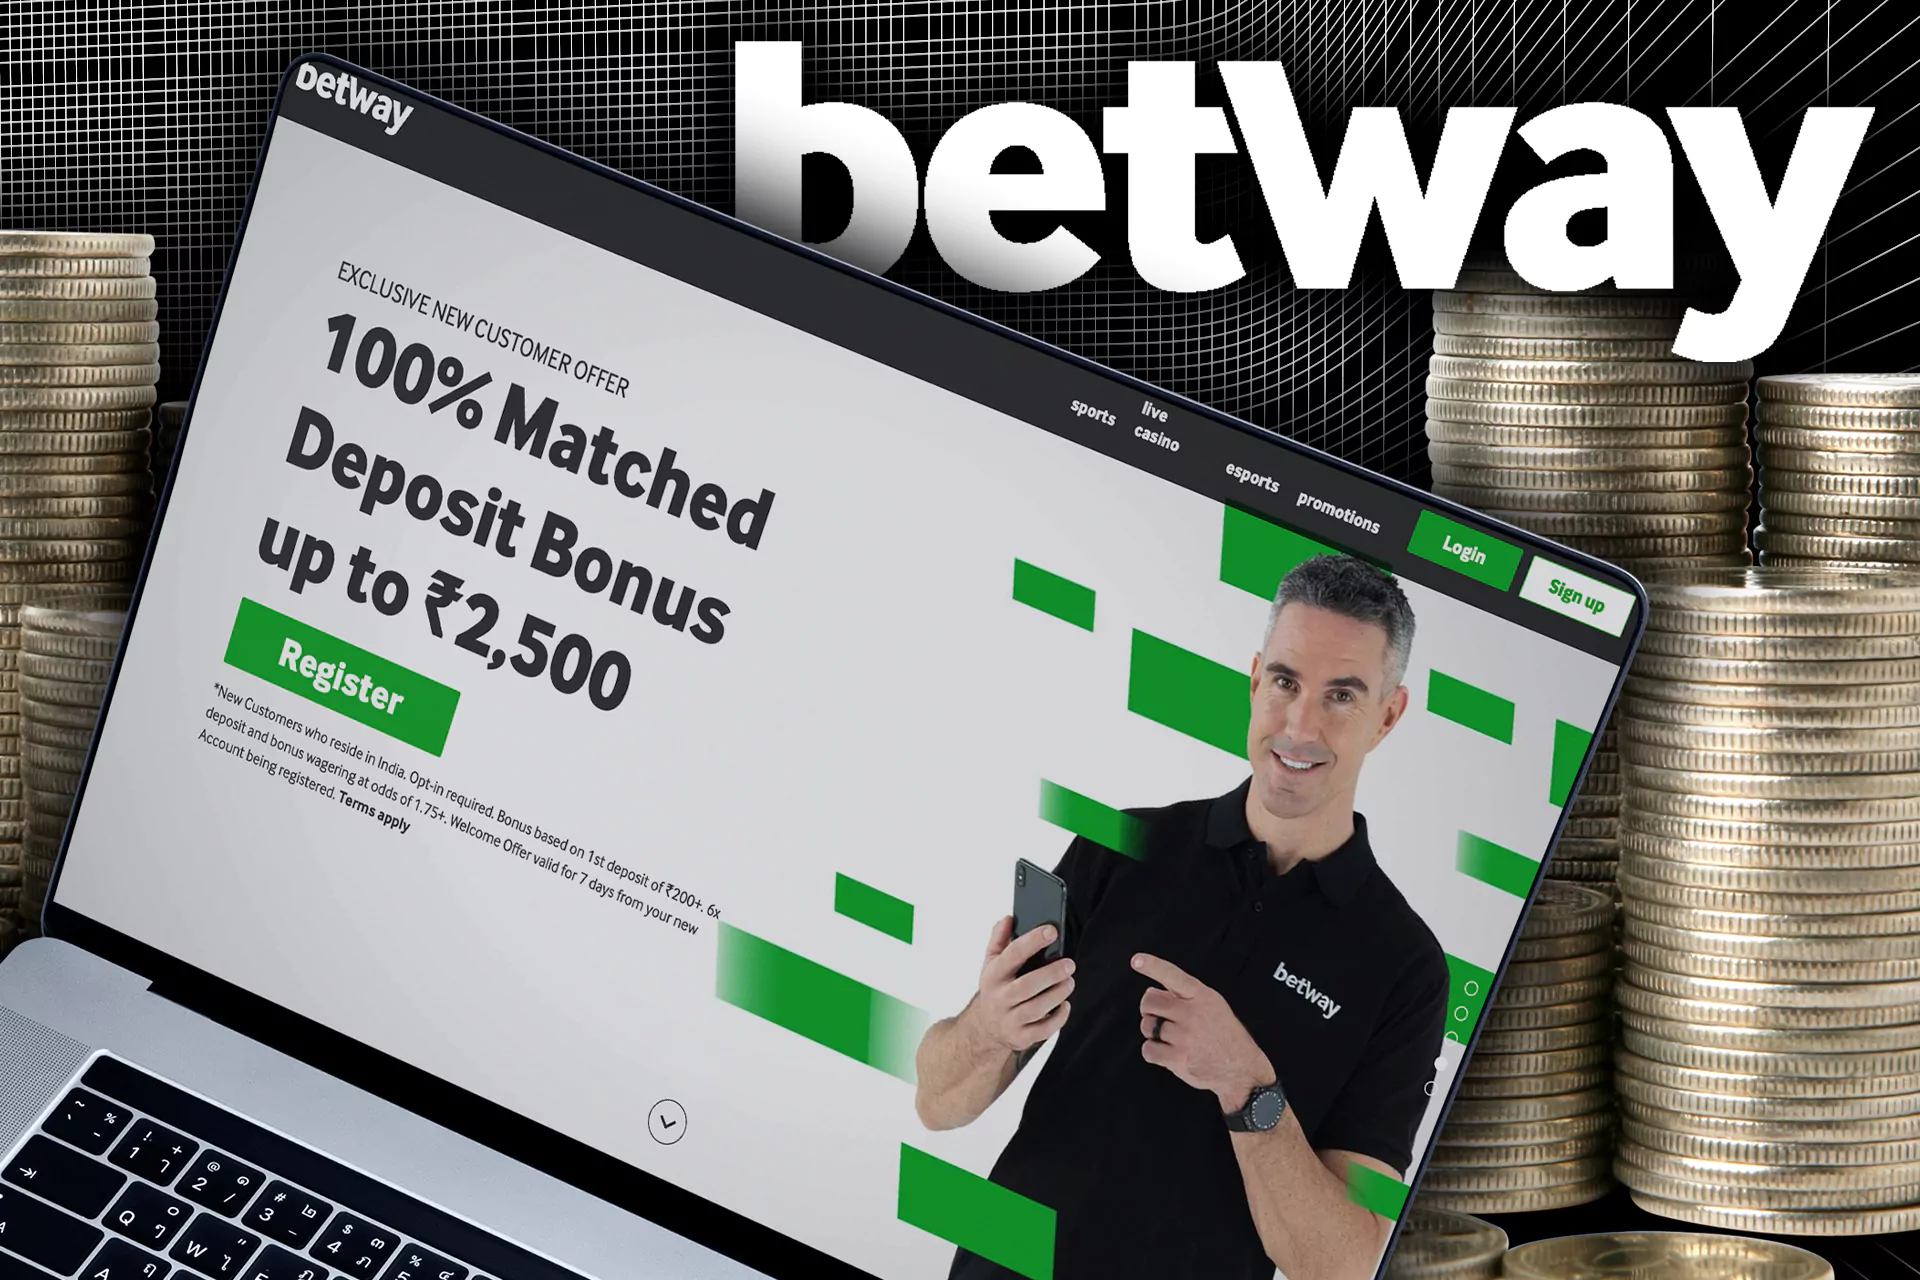 For new users, there is a welcome offer of up to 2500 INR on Betway.